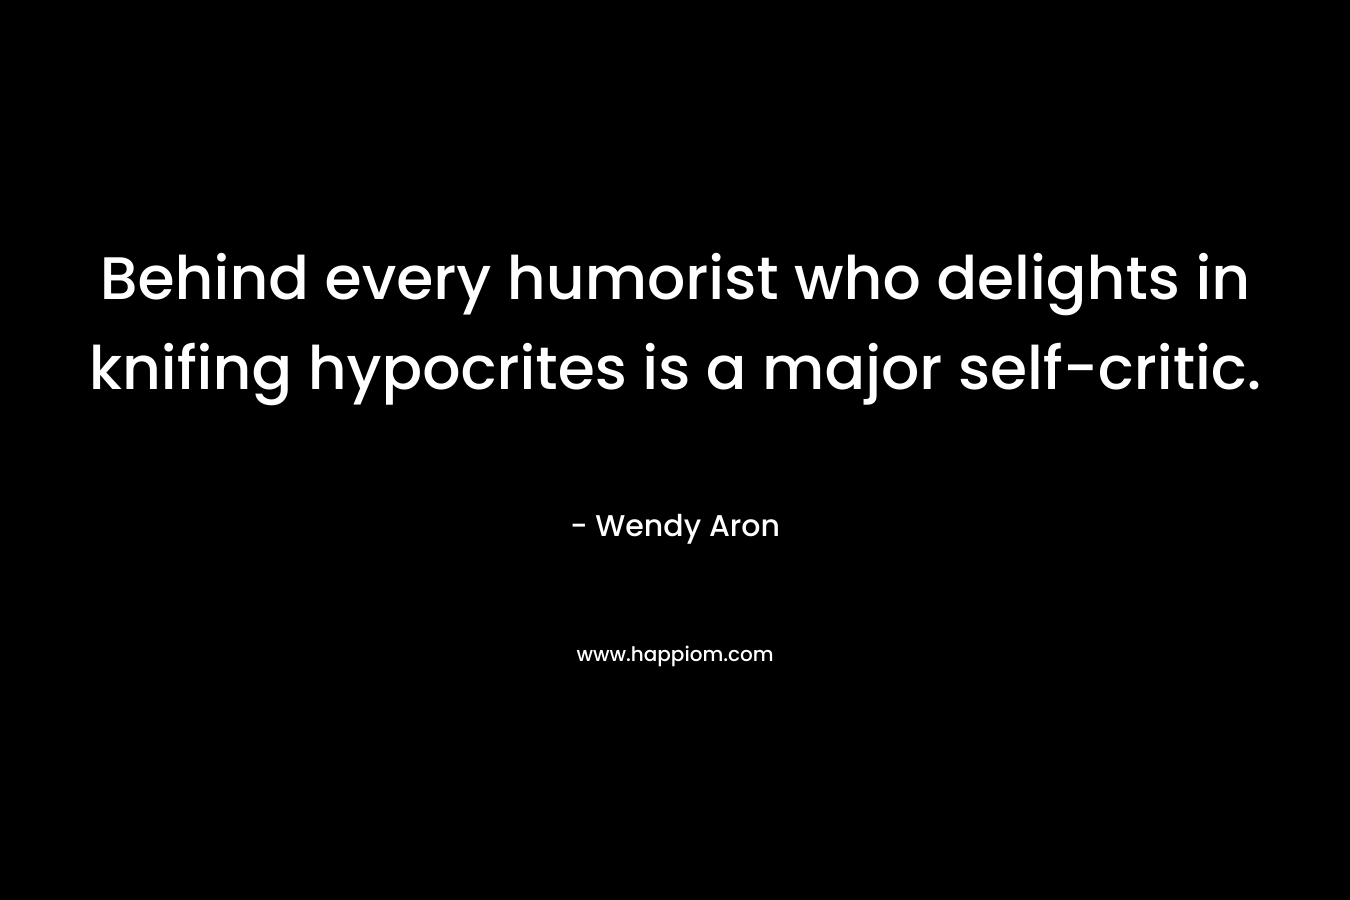 Behind every humorist who delights in knifing hypocrites is a major self-critic.